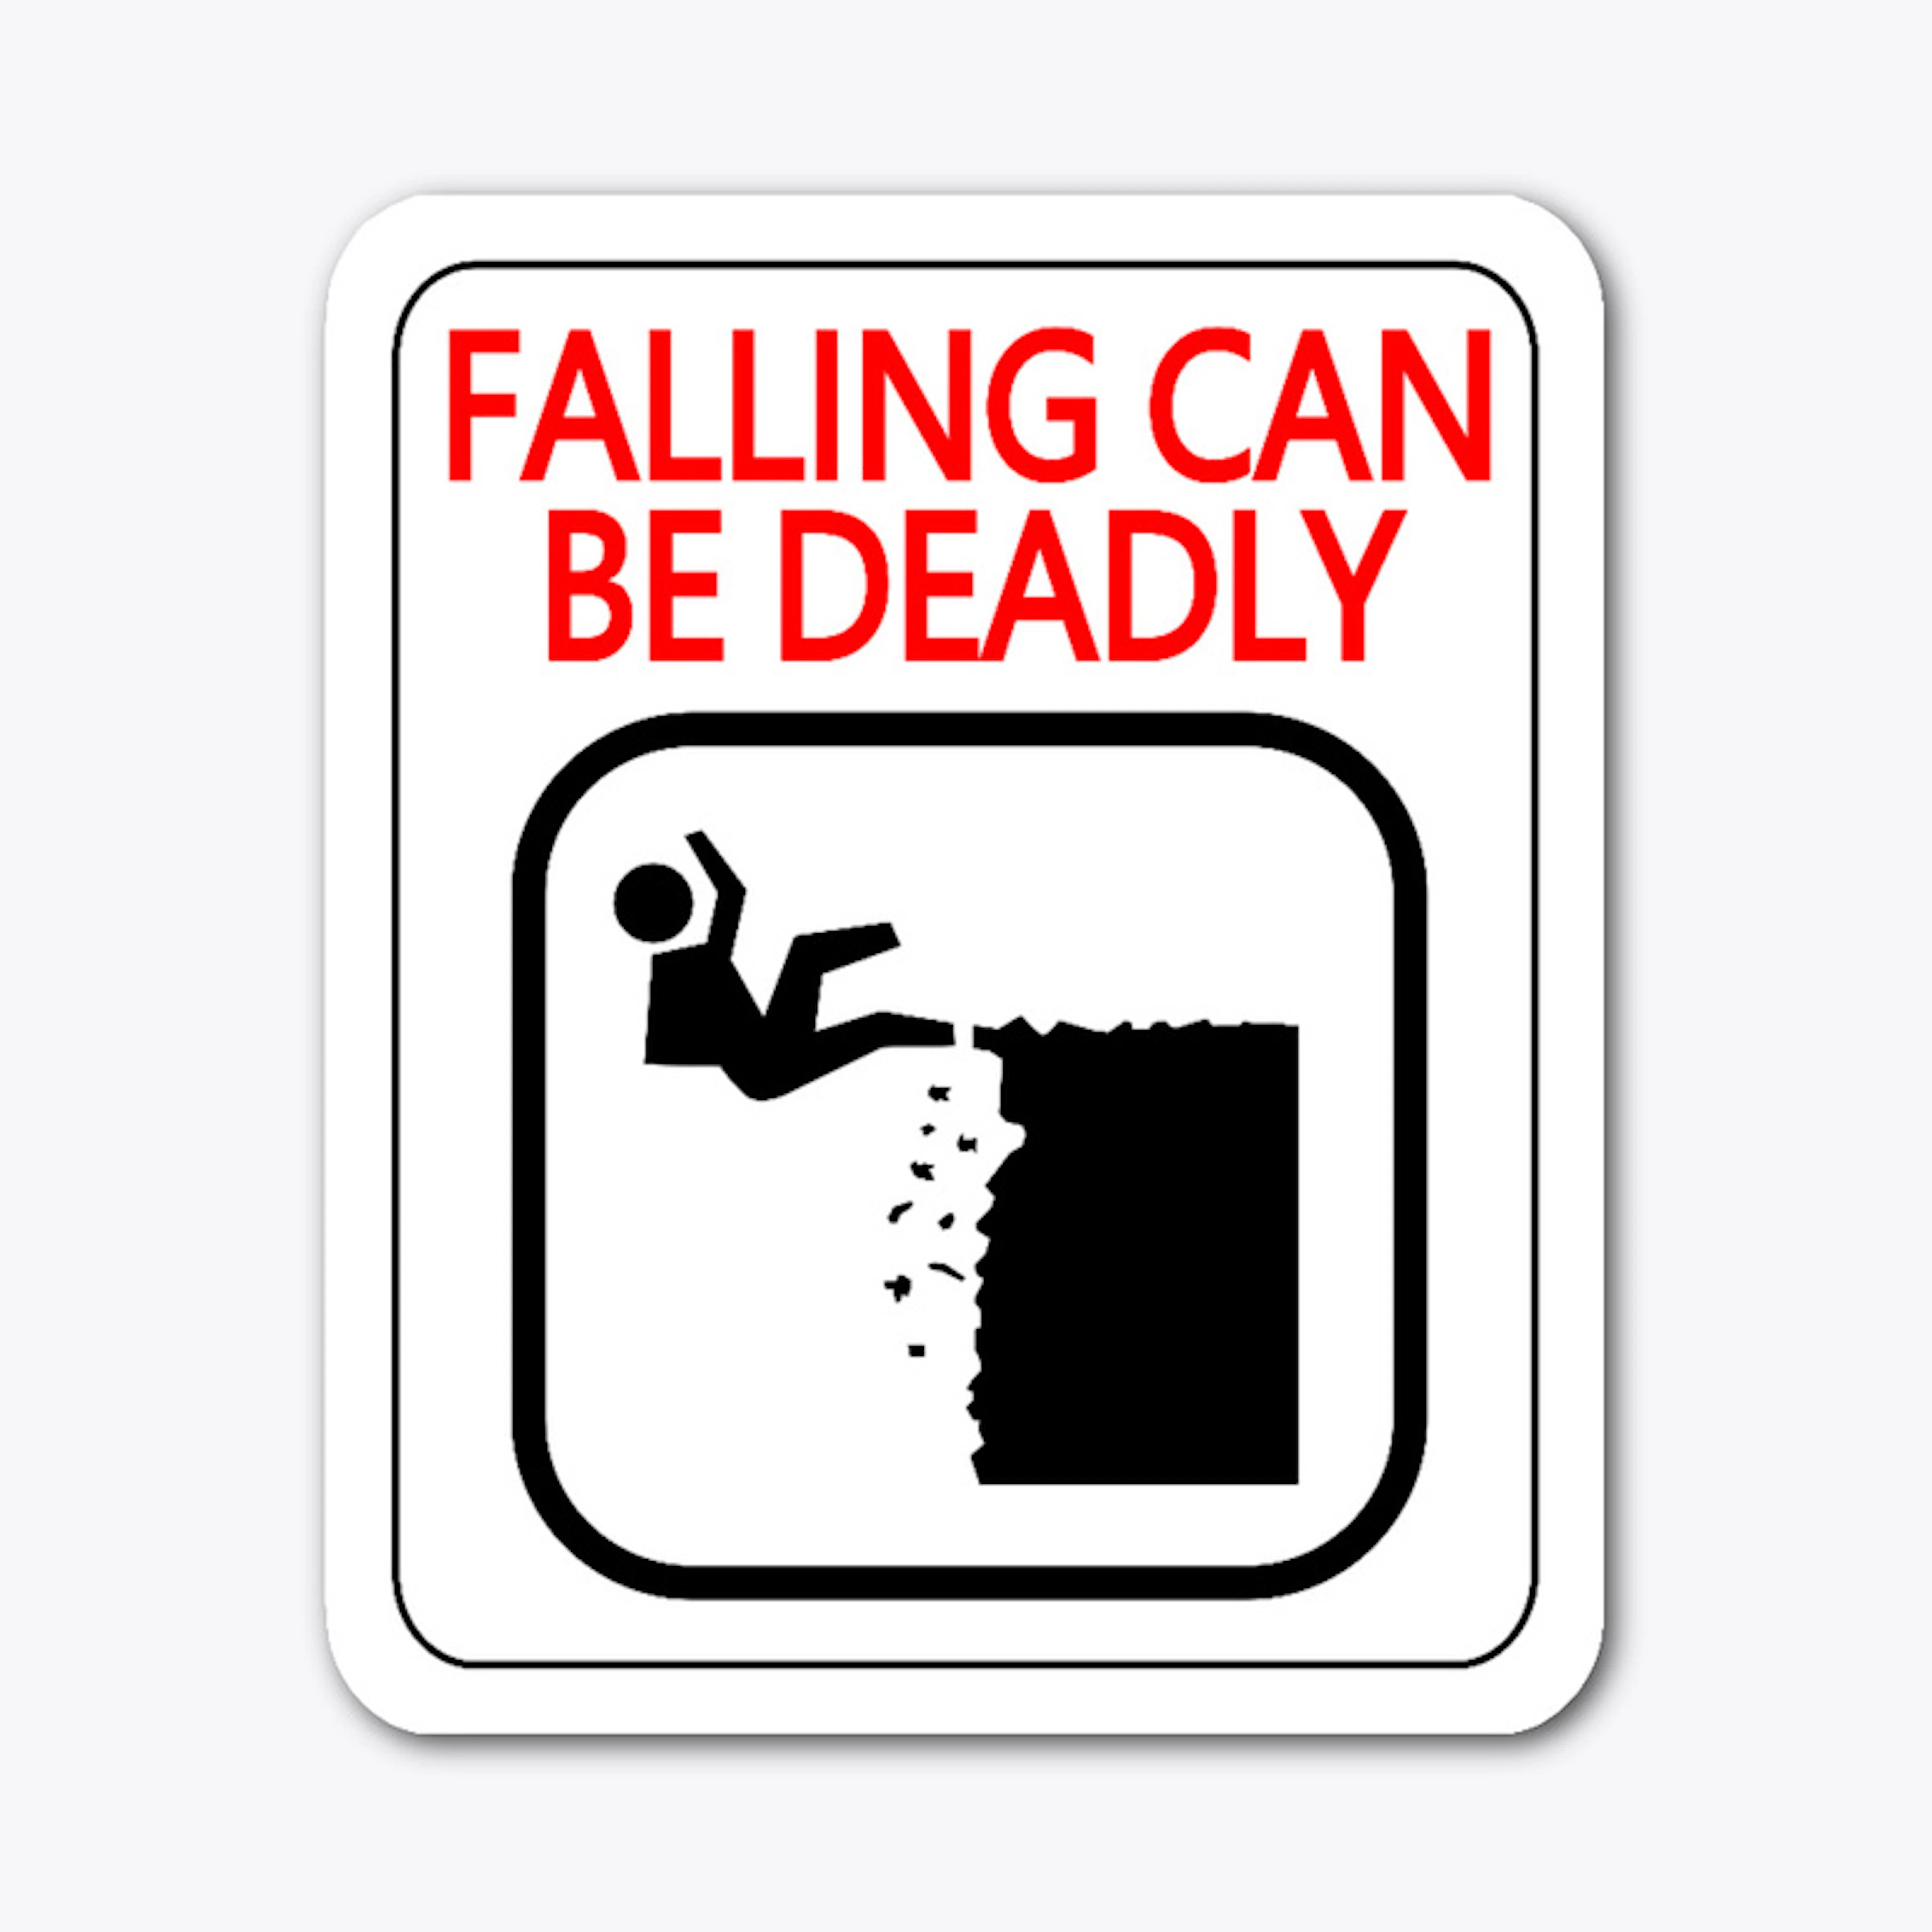 Falling can be deadly